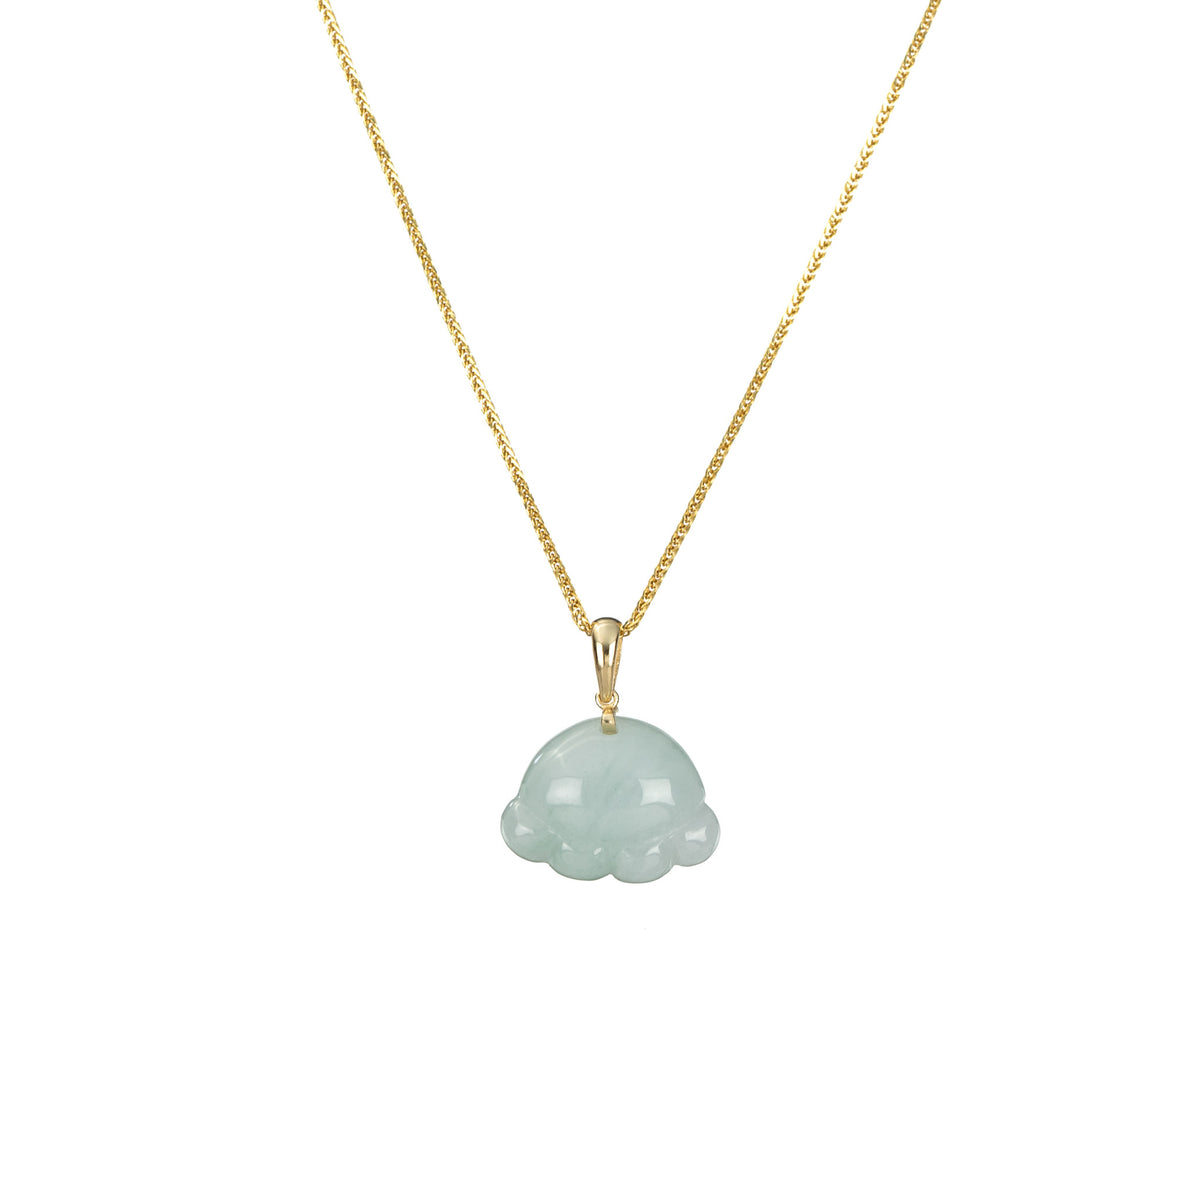 Little Paw Jade Pendant with 18K Yellow Gold